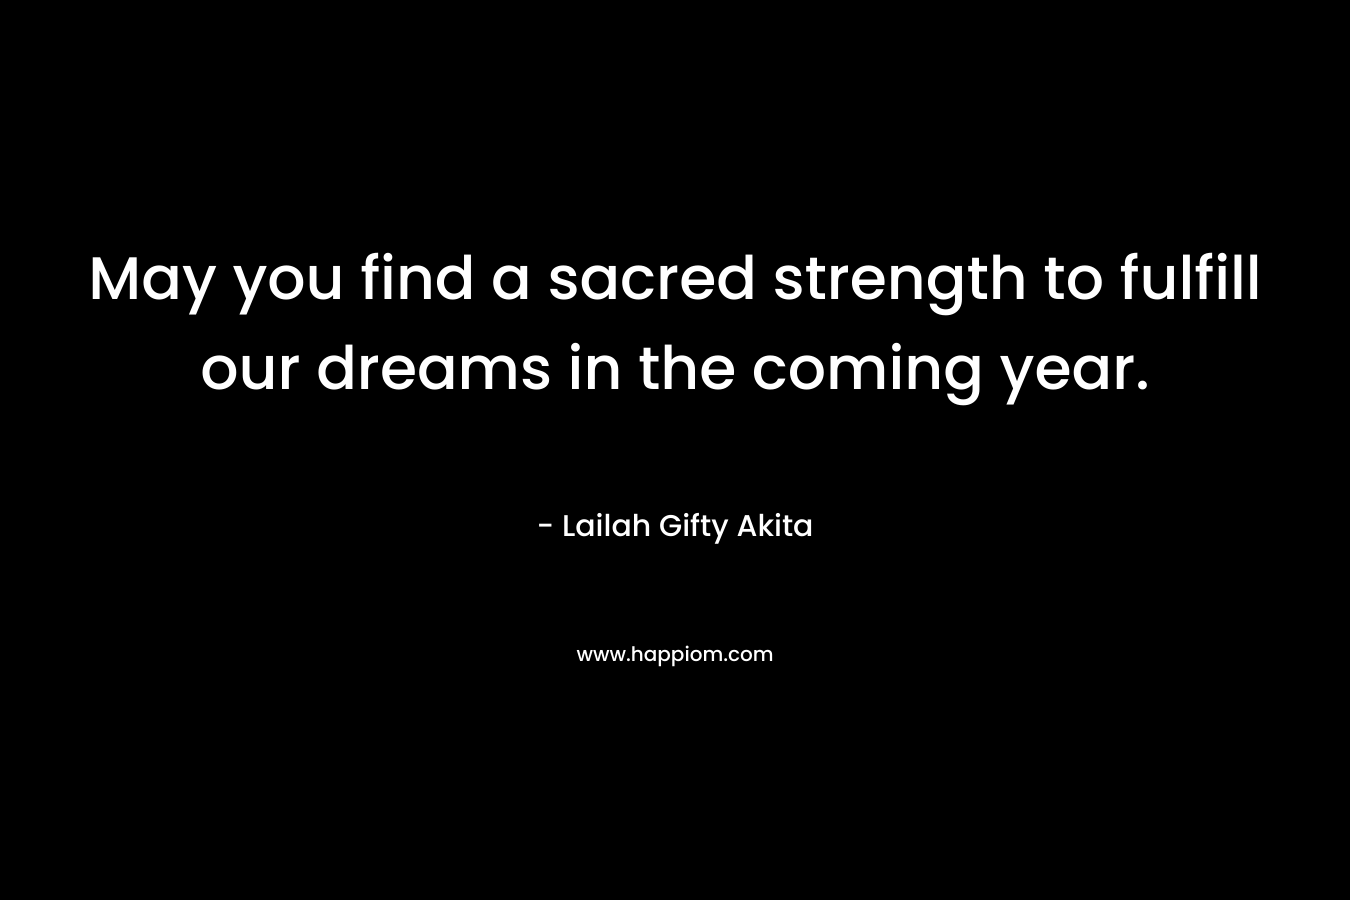 May you find a sacred strength to fulfill our dreams in the coming year.